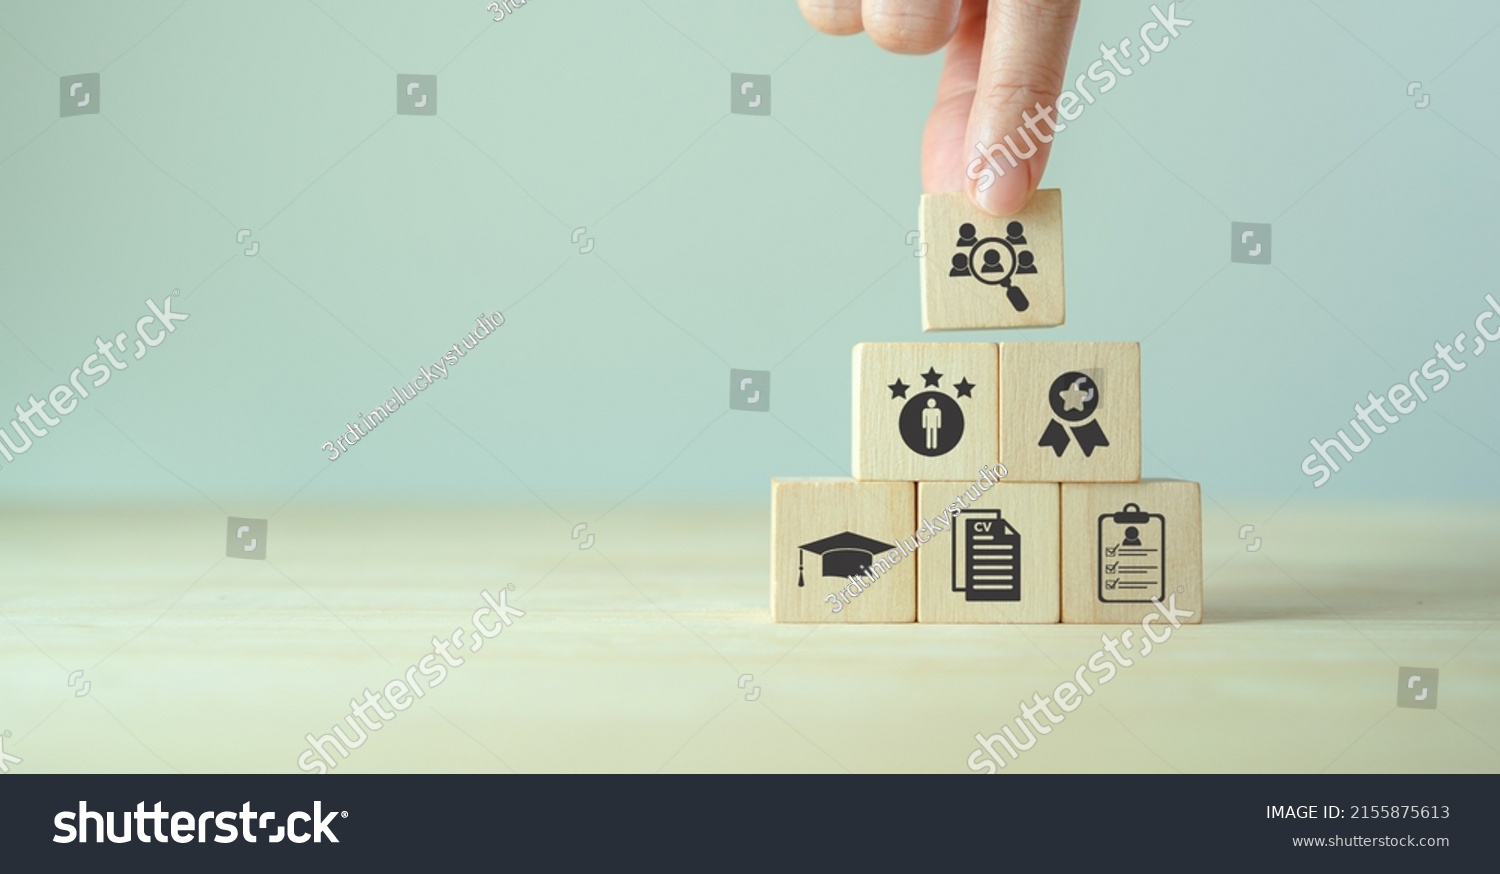 HRM and recruitment concept.  Job search, headhunting and recruitment process. Holding wooden cube with icons of education, qualification, cv, resume, skills and experience on smart grey background.  #2155875613